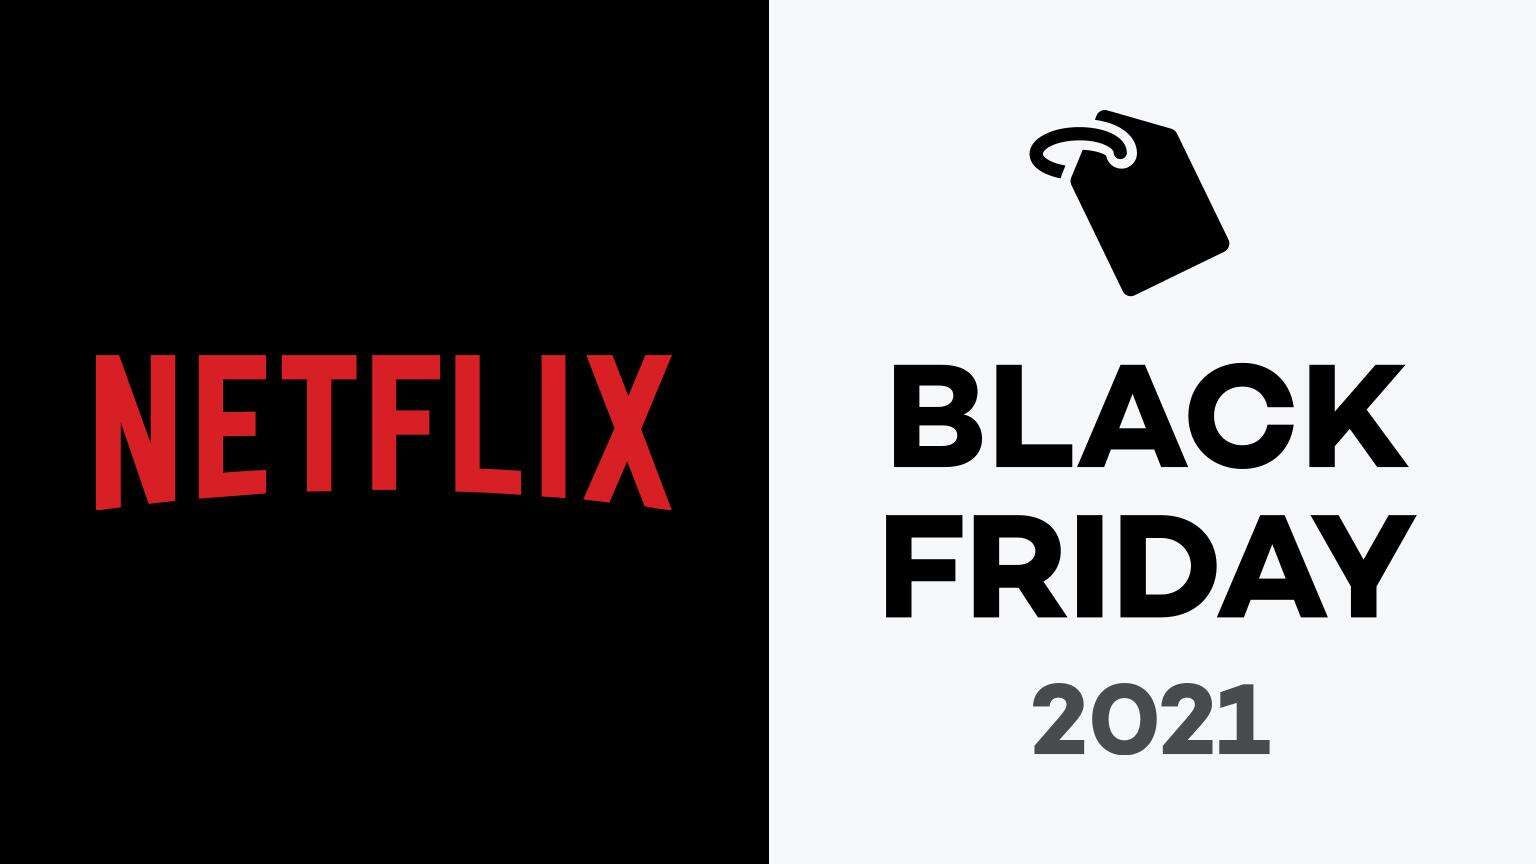 Netflix Black Friday 2021 Deals and Sales What Are the Best Ways to